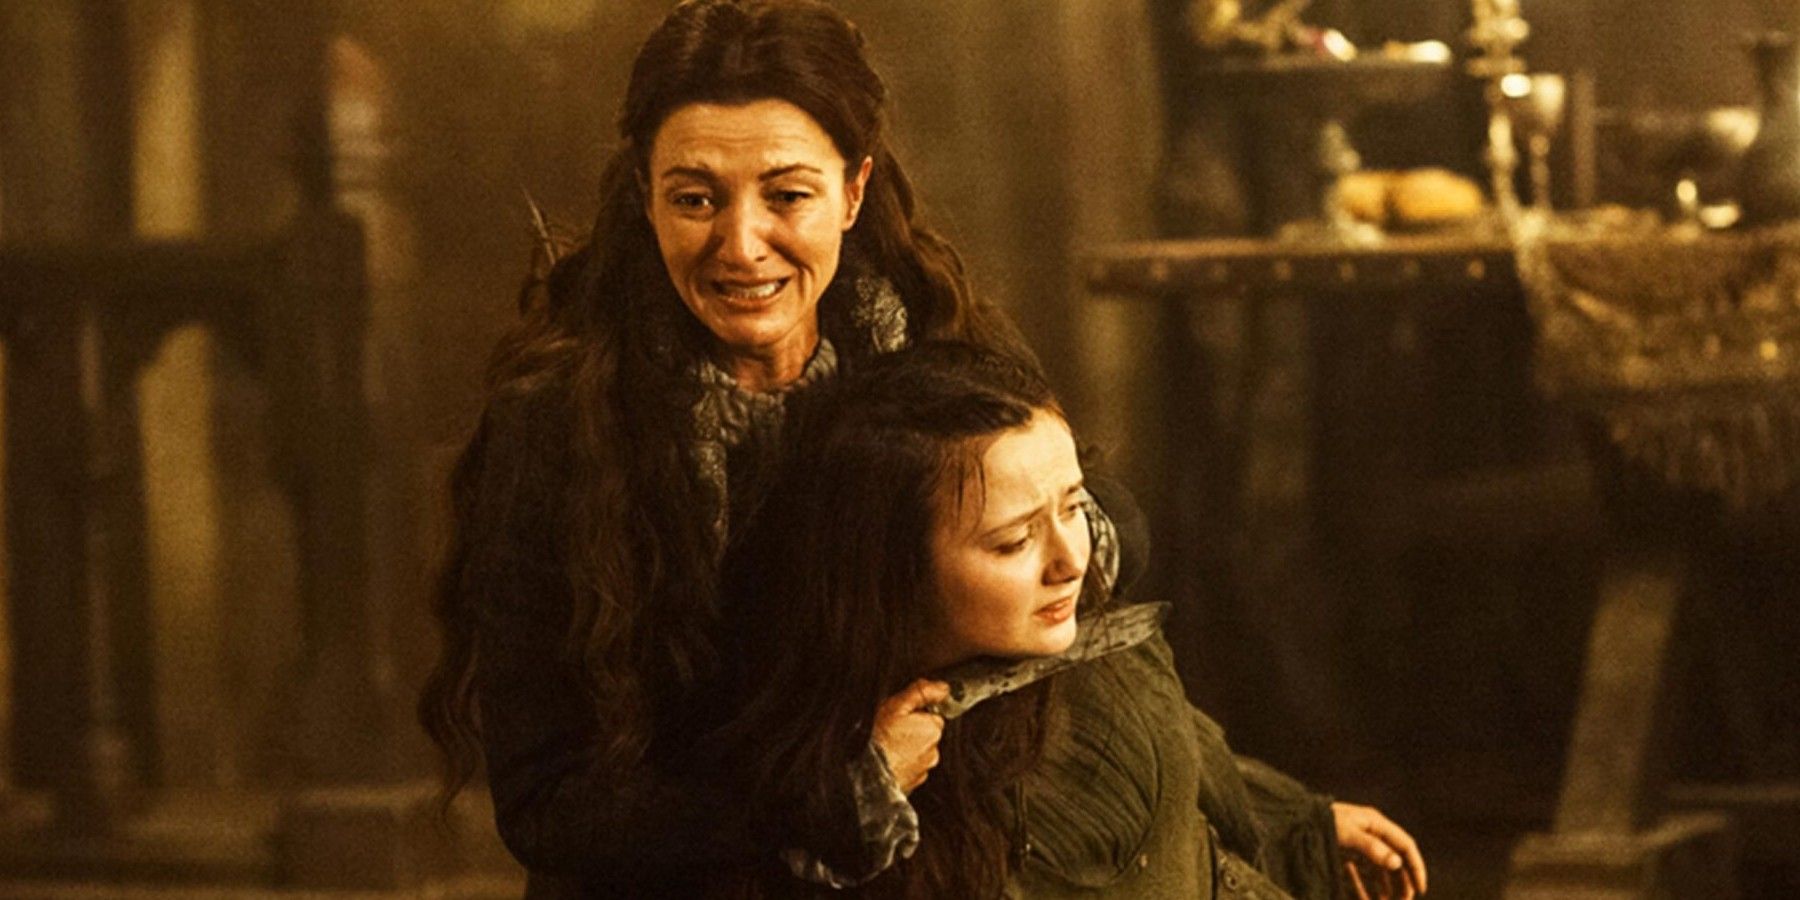 Michelle Fairley as Catelyn Stark holding Frey's wife and screaming at the Red Wedding in Game of Thrones